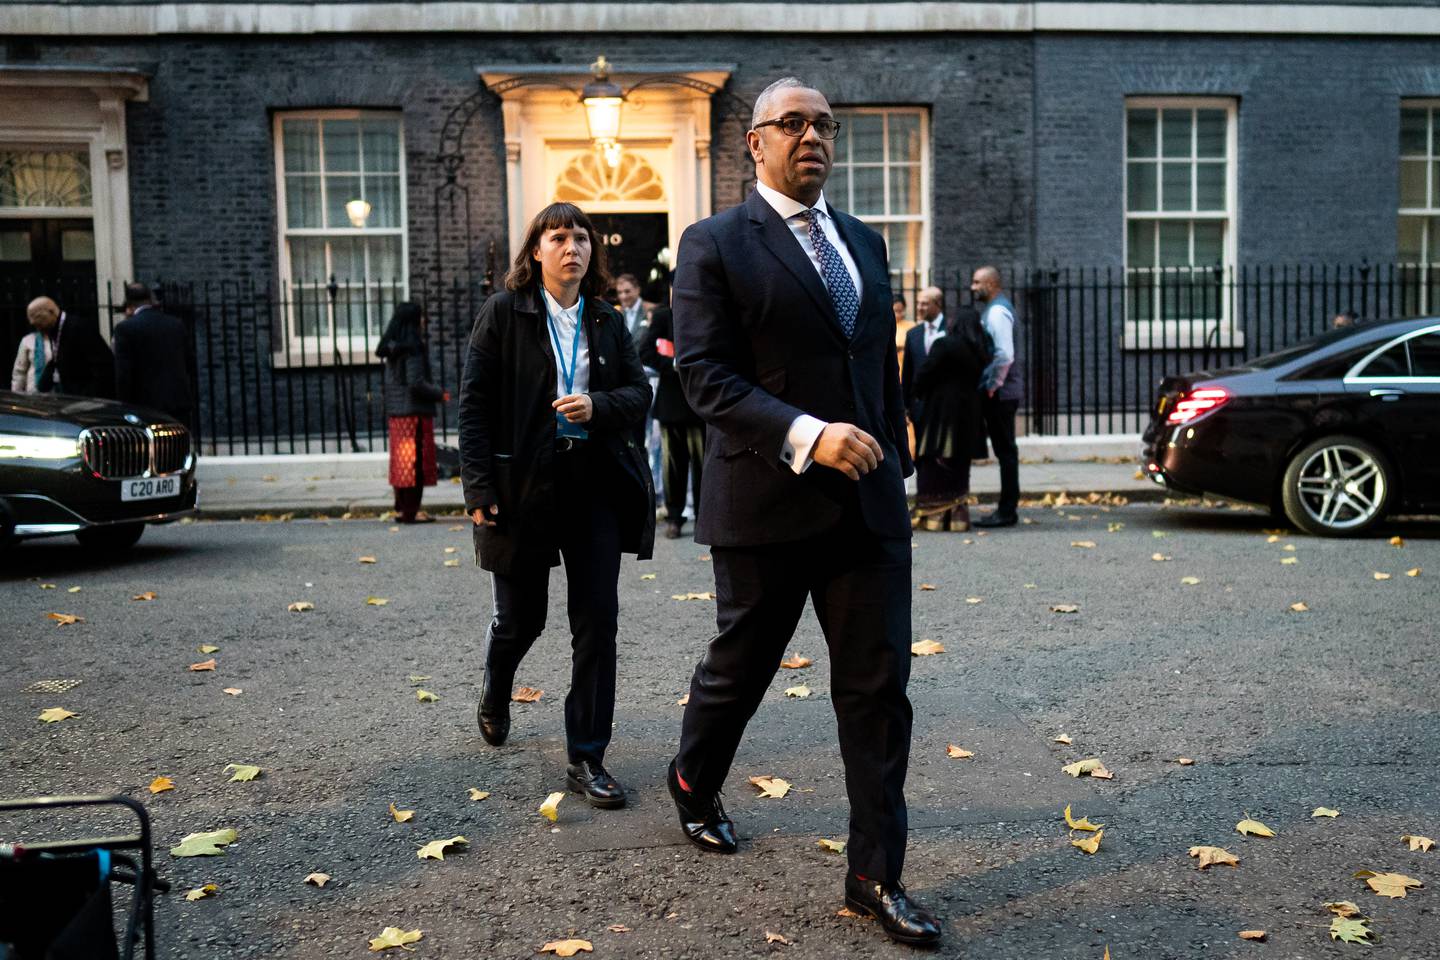 James Cleverly, the UK's foreign secretary, outside No 10 Downing Street. PA

